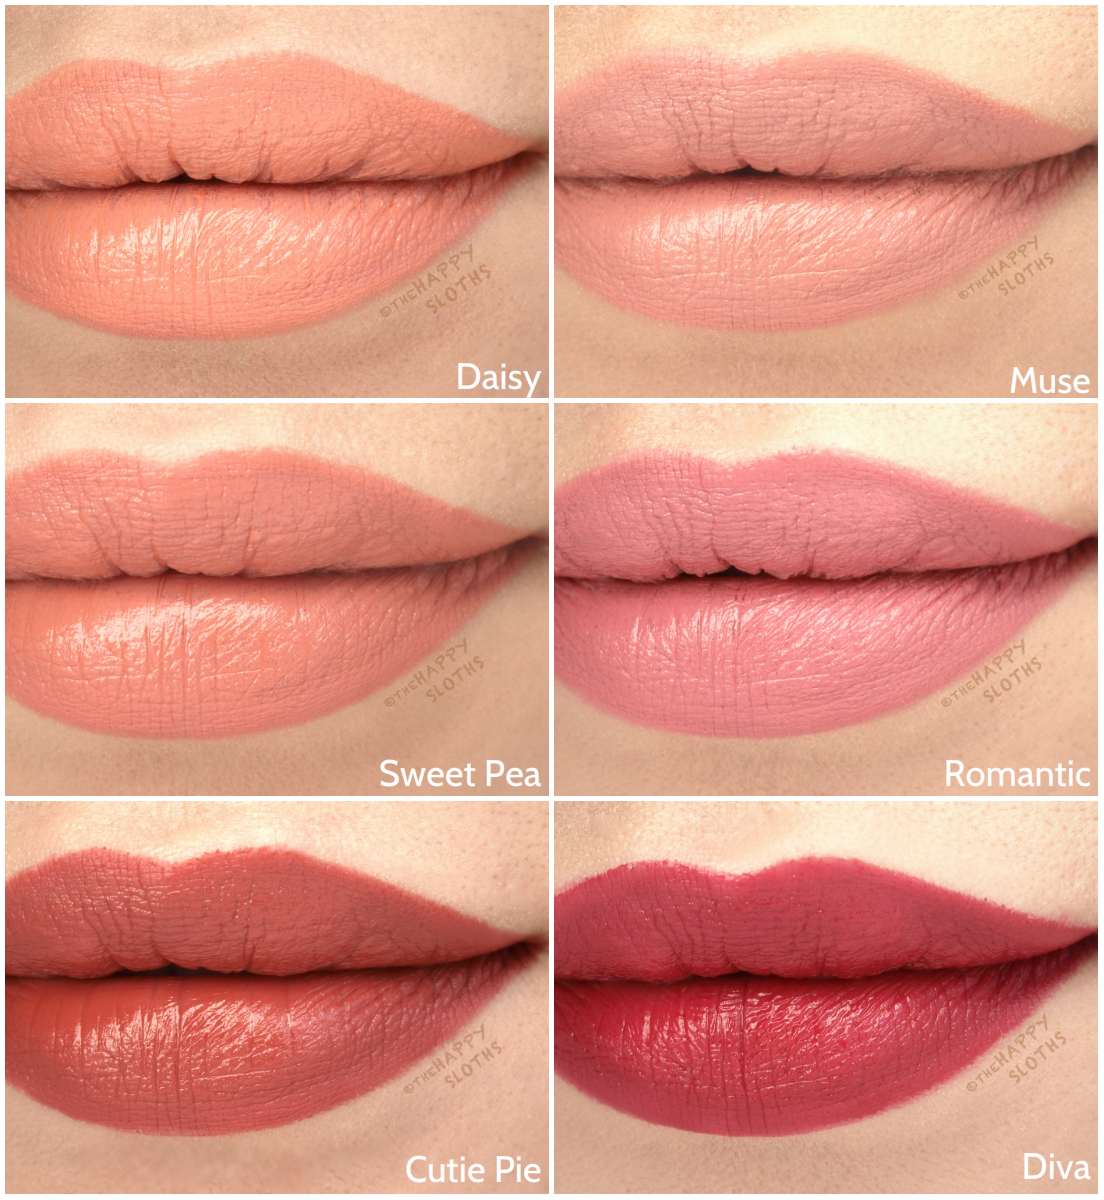 Tarte The Lip Architect Lipstick & Liner: Review and Swatches